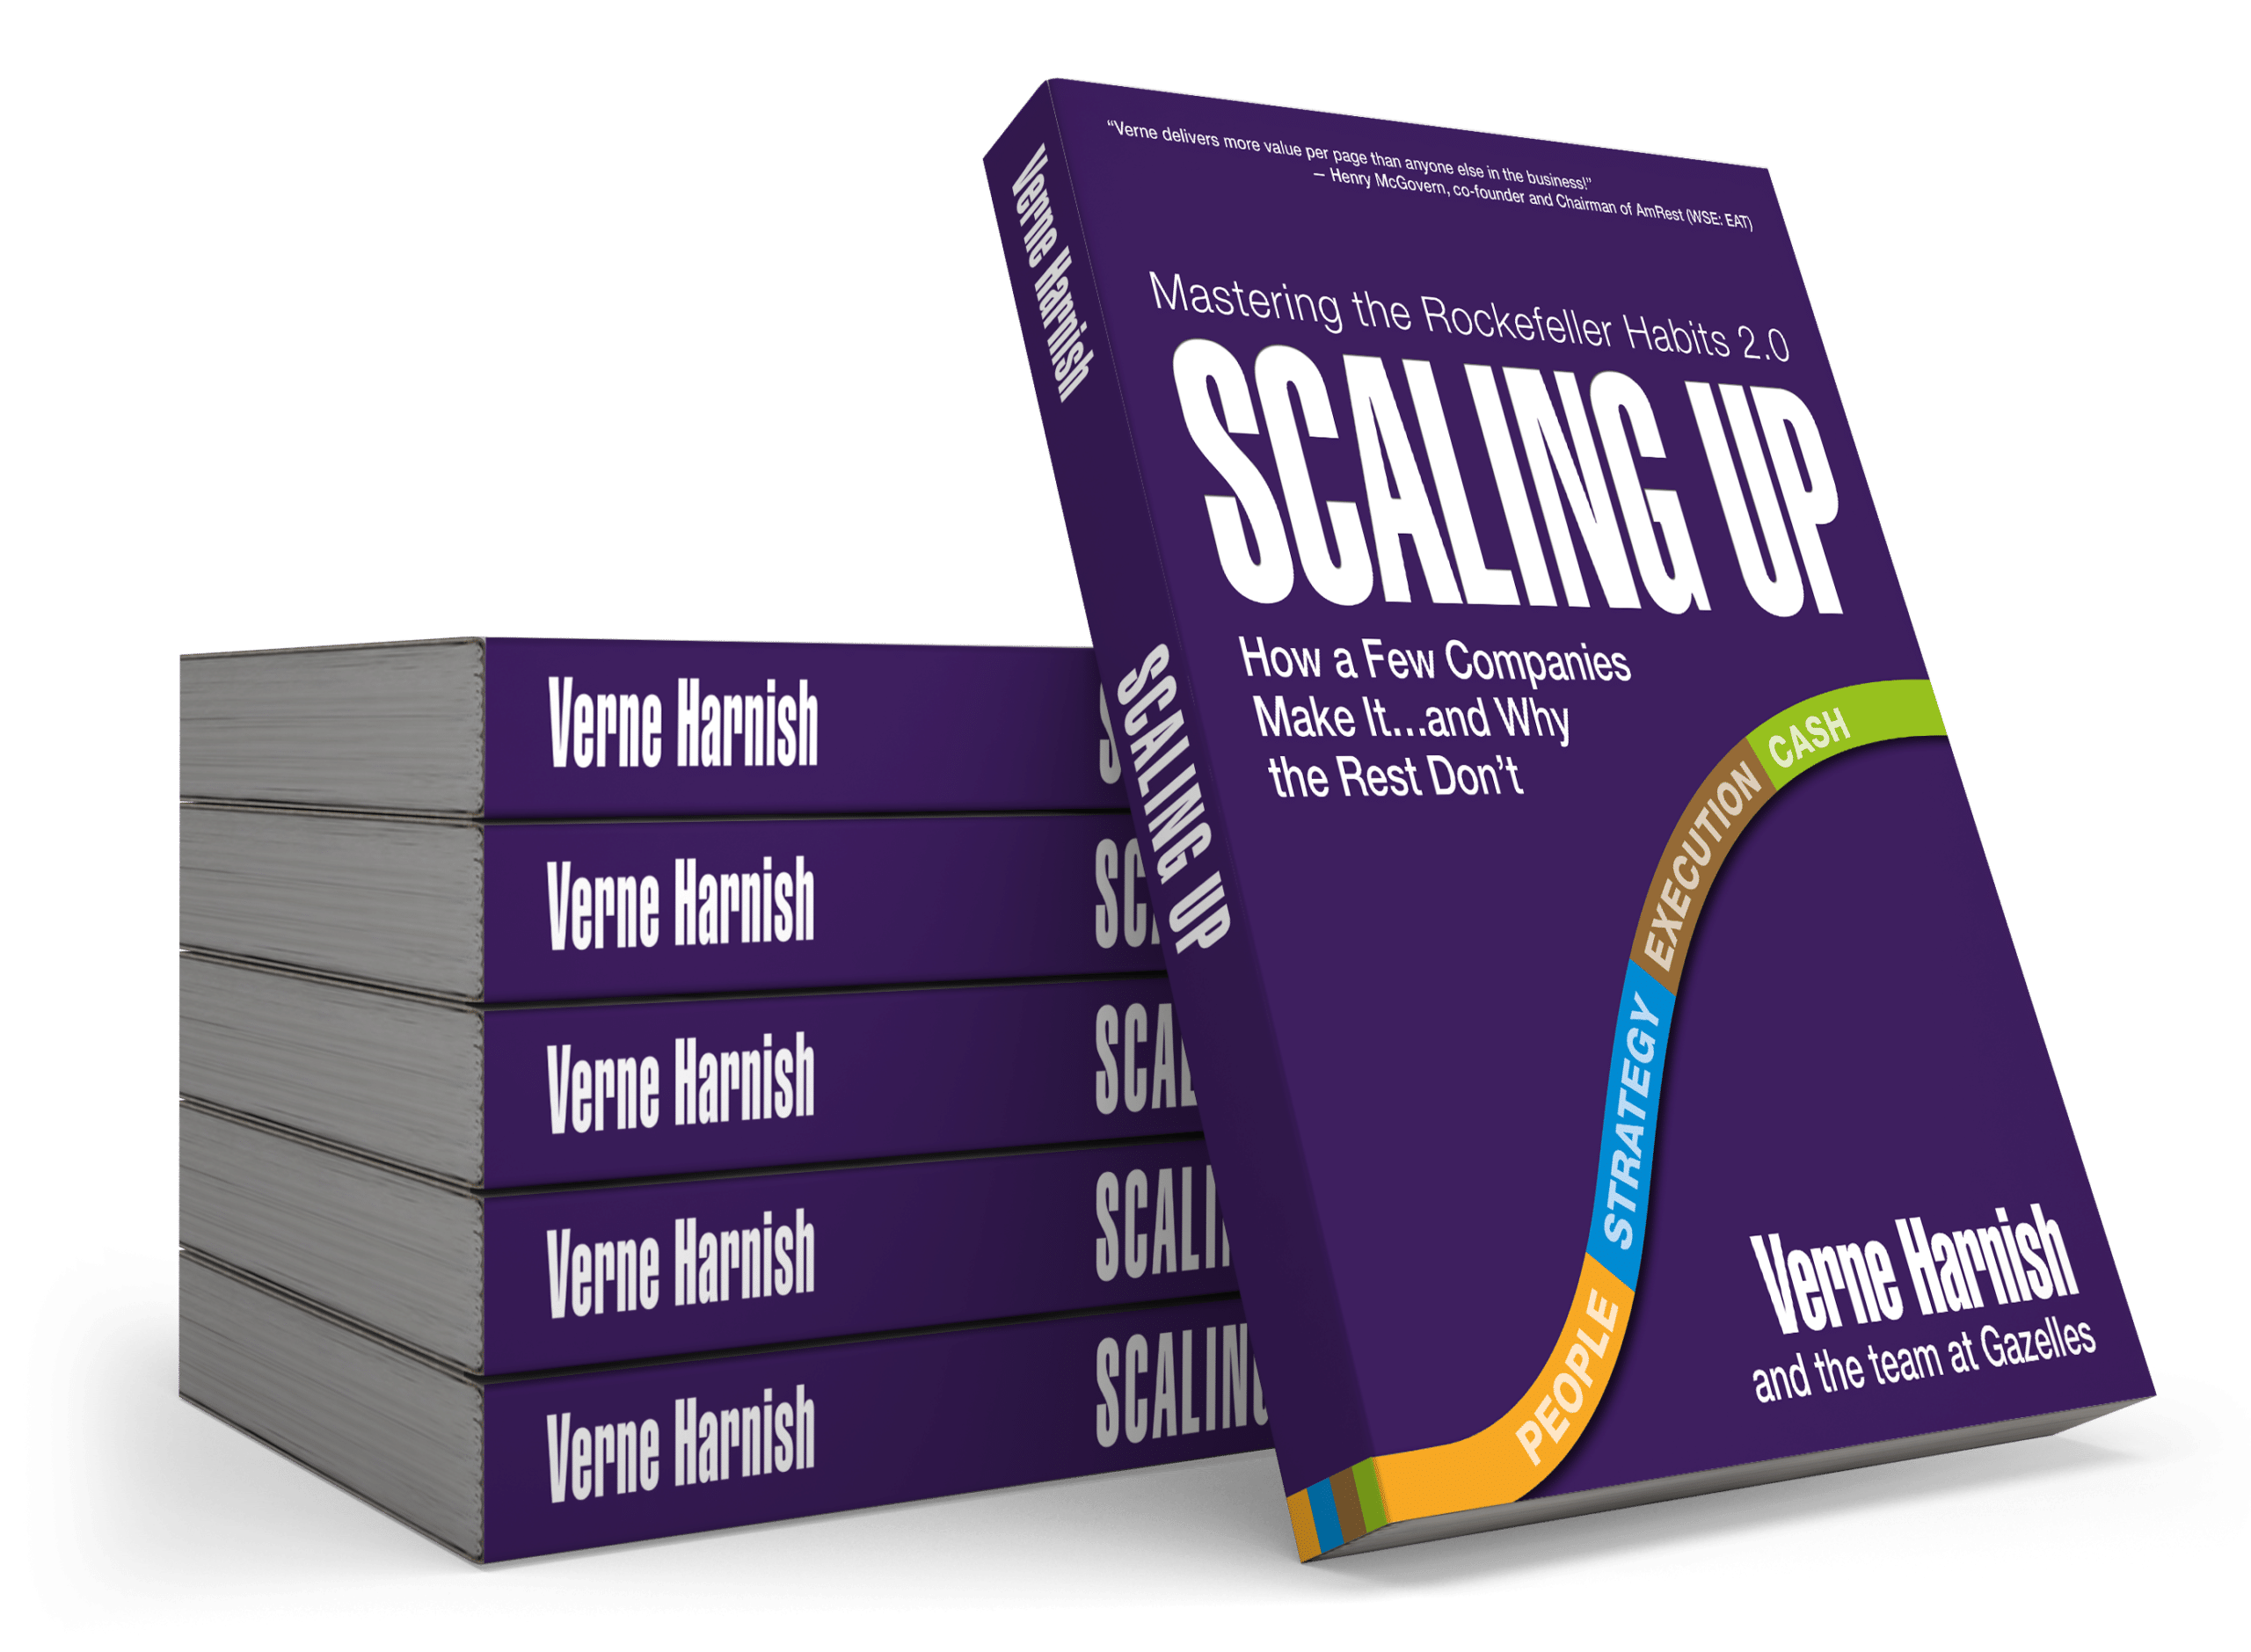 An image of the cover of the book Scaling Up